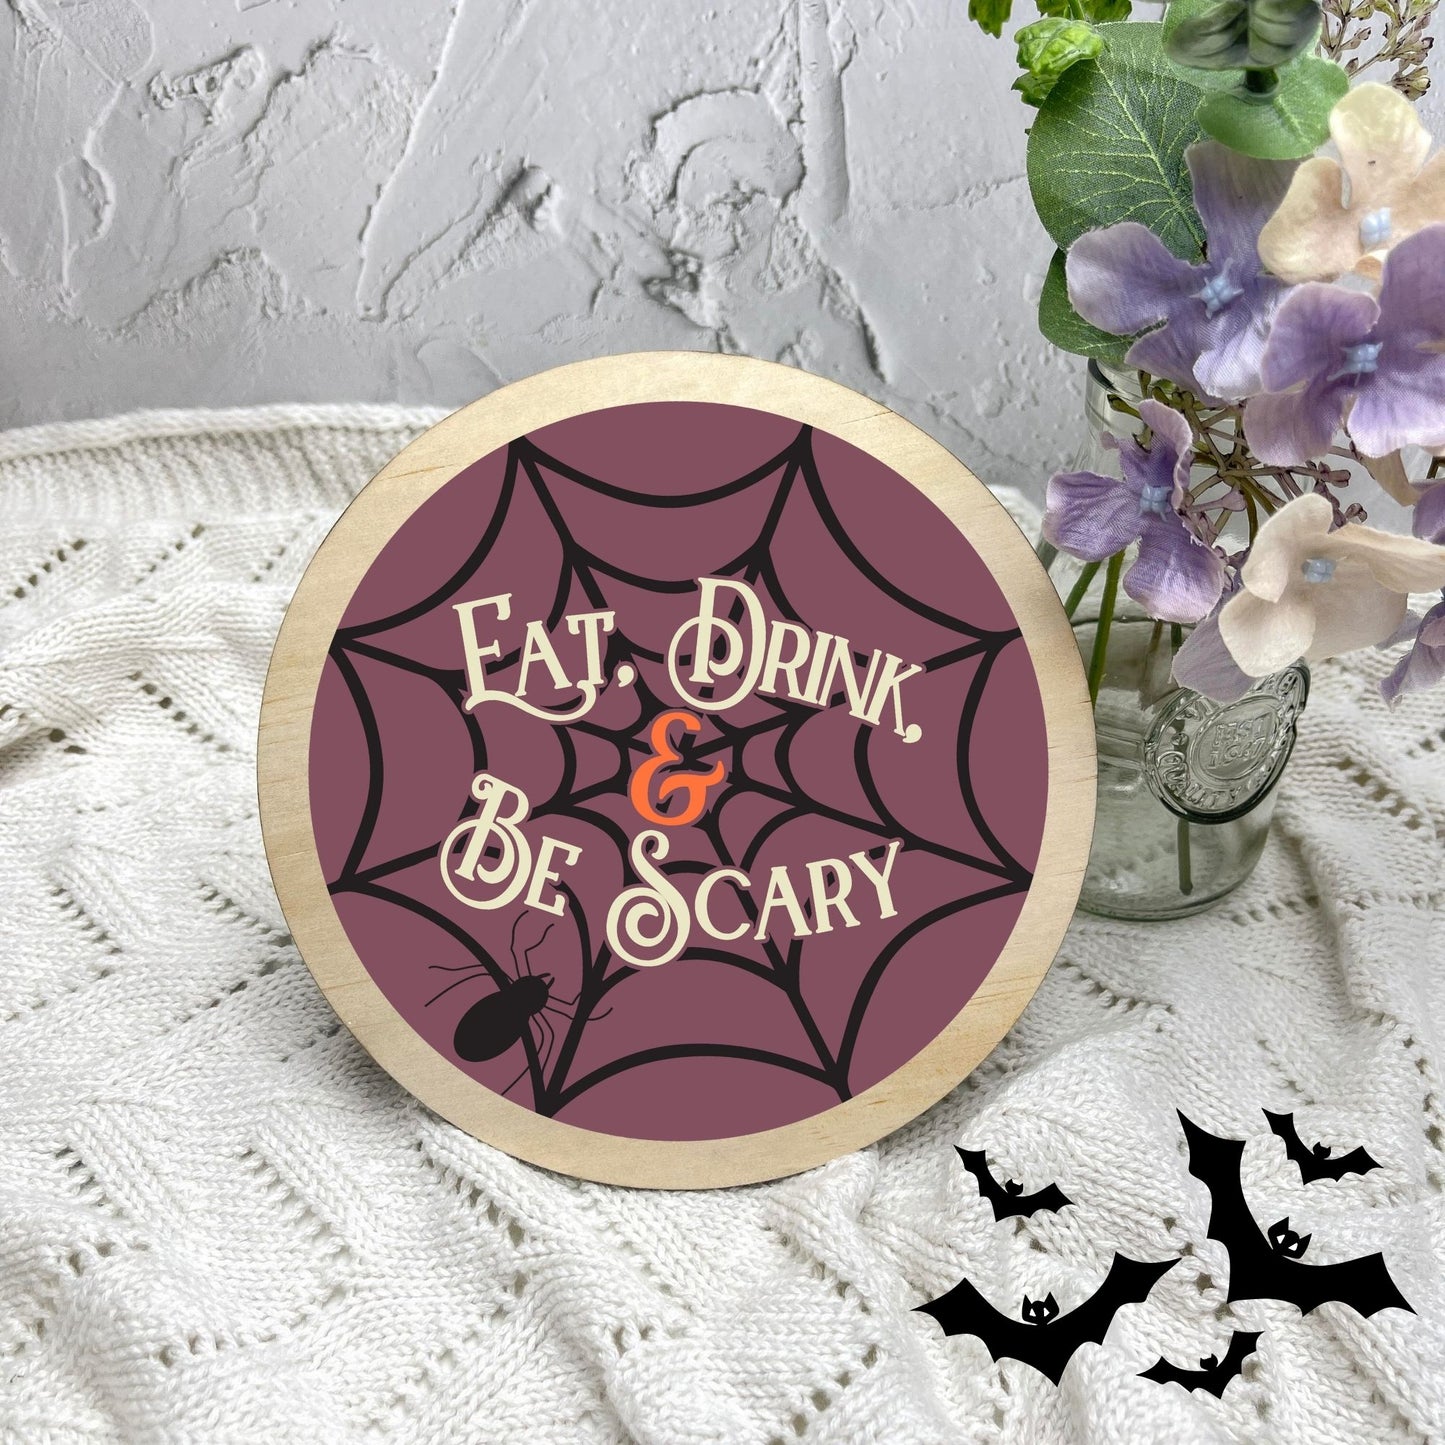 Eat drink and be scary sign, Halloween Decor, Spooky Vibes, hocus pocus sign, trick or treat decor, haunted house h39